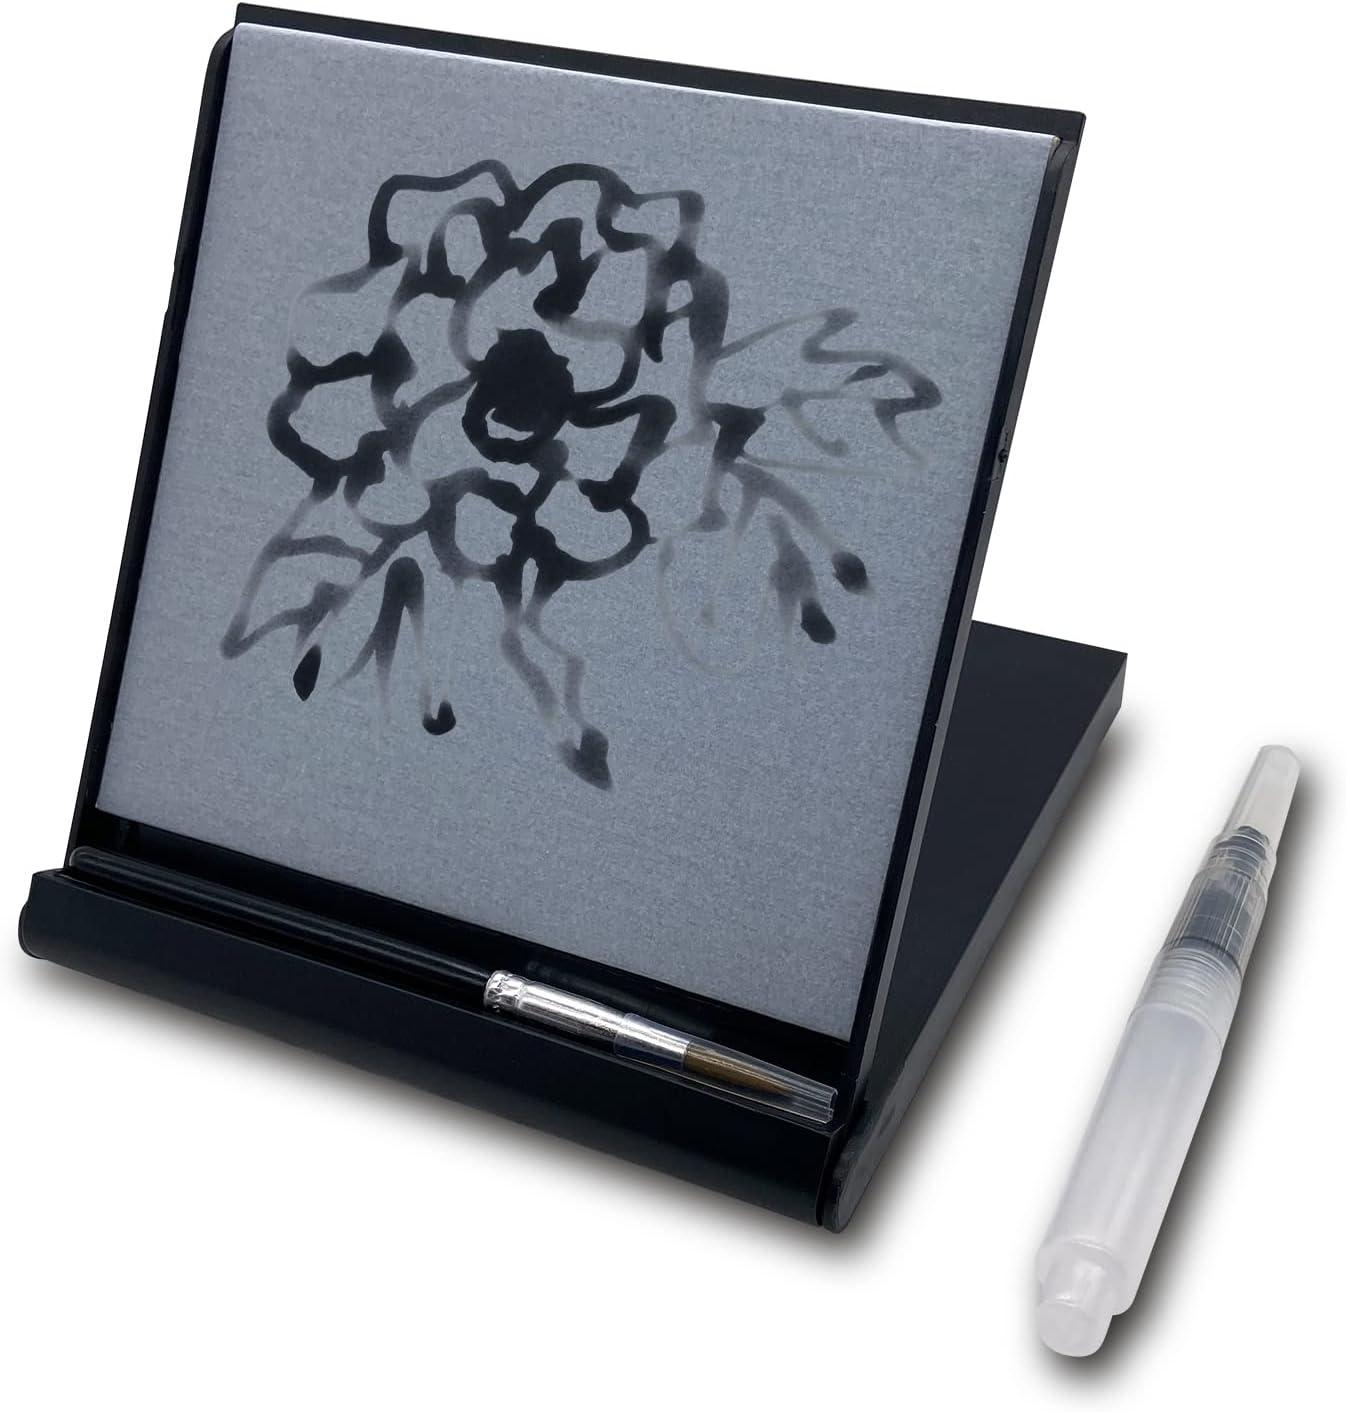  eSaturn Mini Buddha Water Drawing Board with Bamboo Brush and  Pen- Repeatable Zen Magic Painting Paint -Mini Relaxation Meditation Sketch  Pad, Black White (10004)